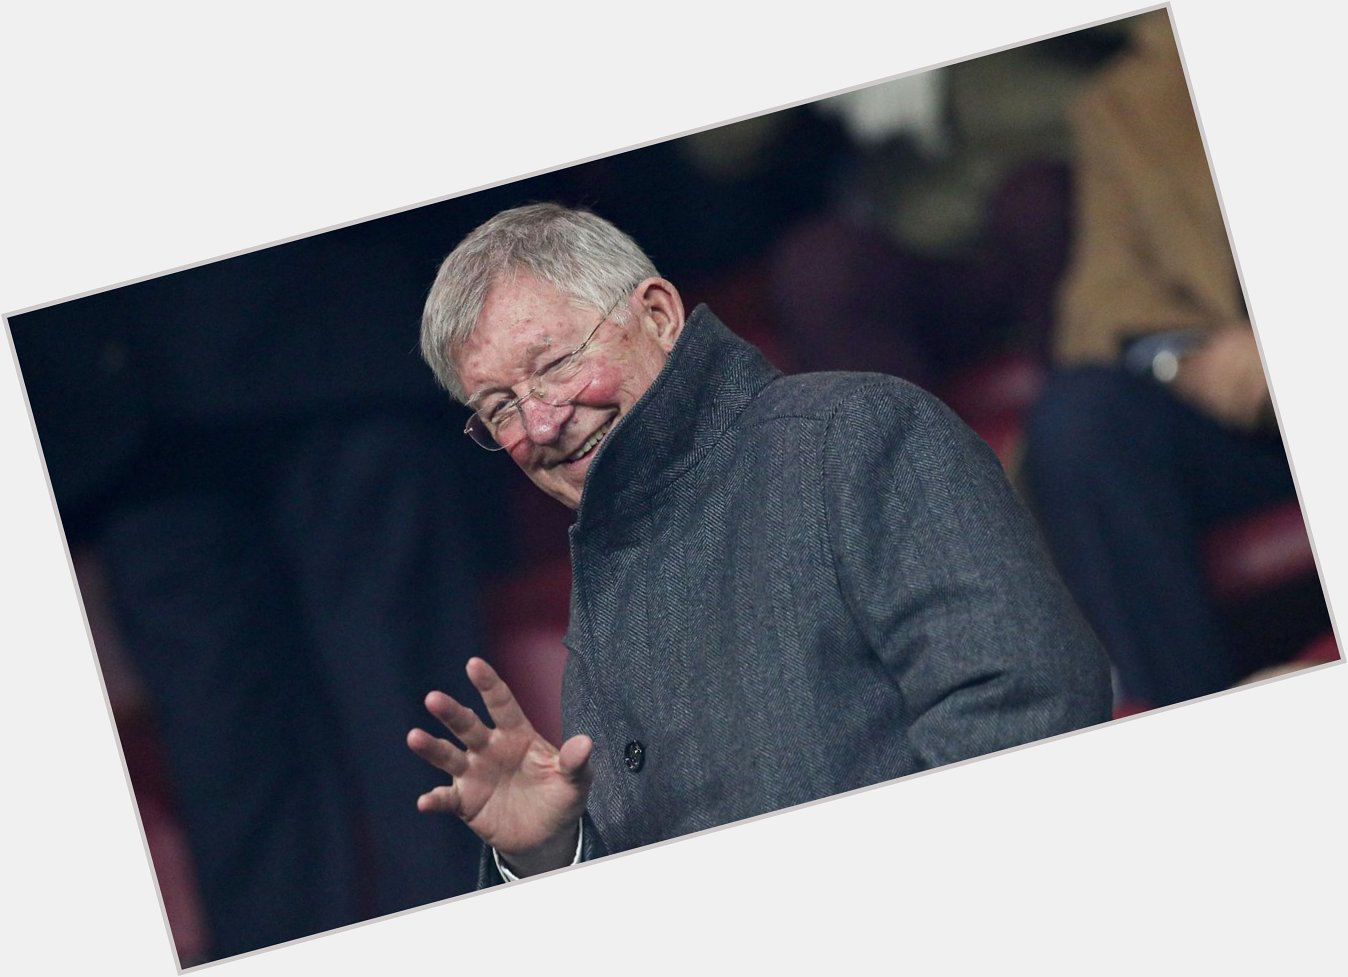 Happy 78th birthday, Sir Alex Ferguson!

How many FA Cup trophies did he win with  